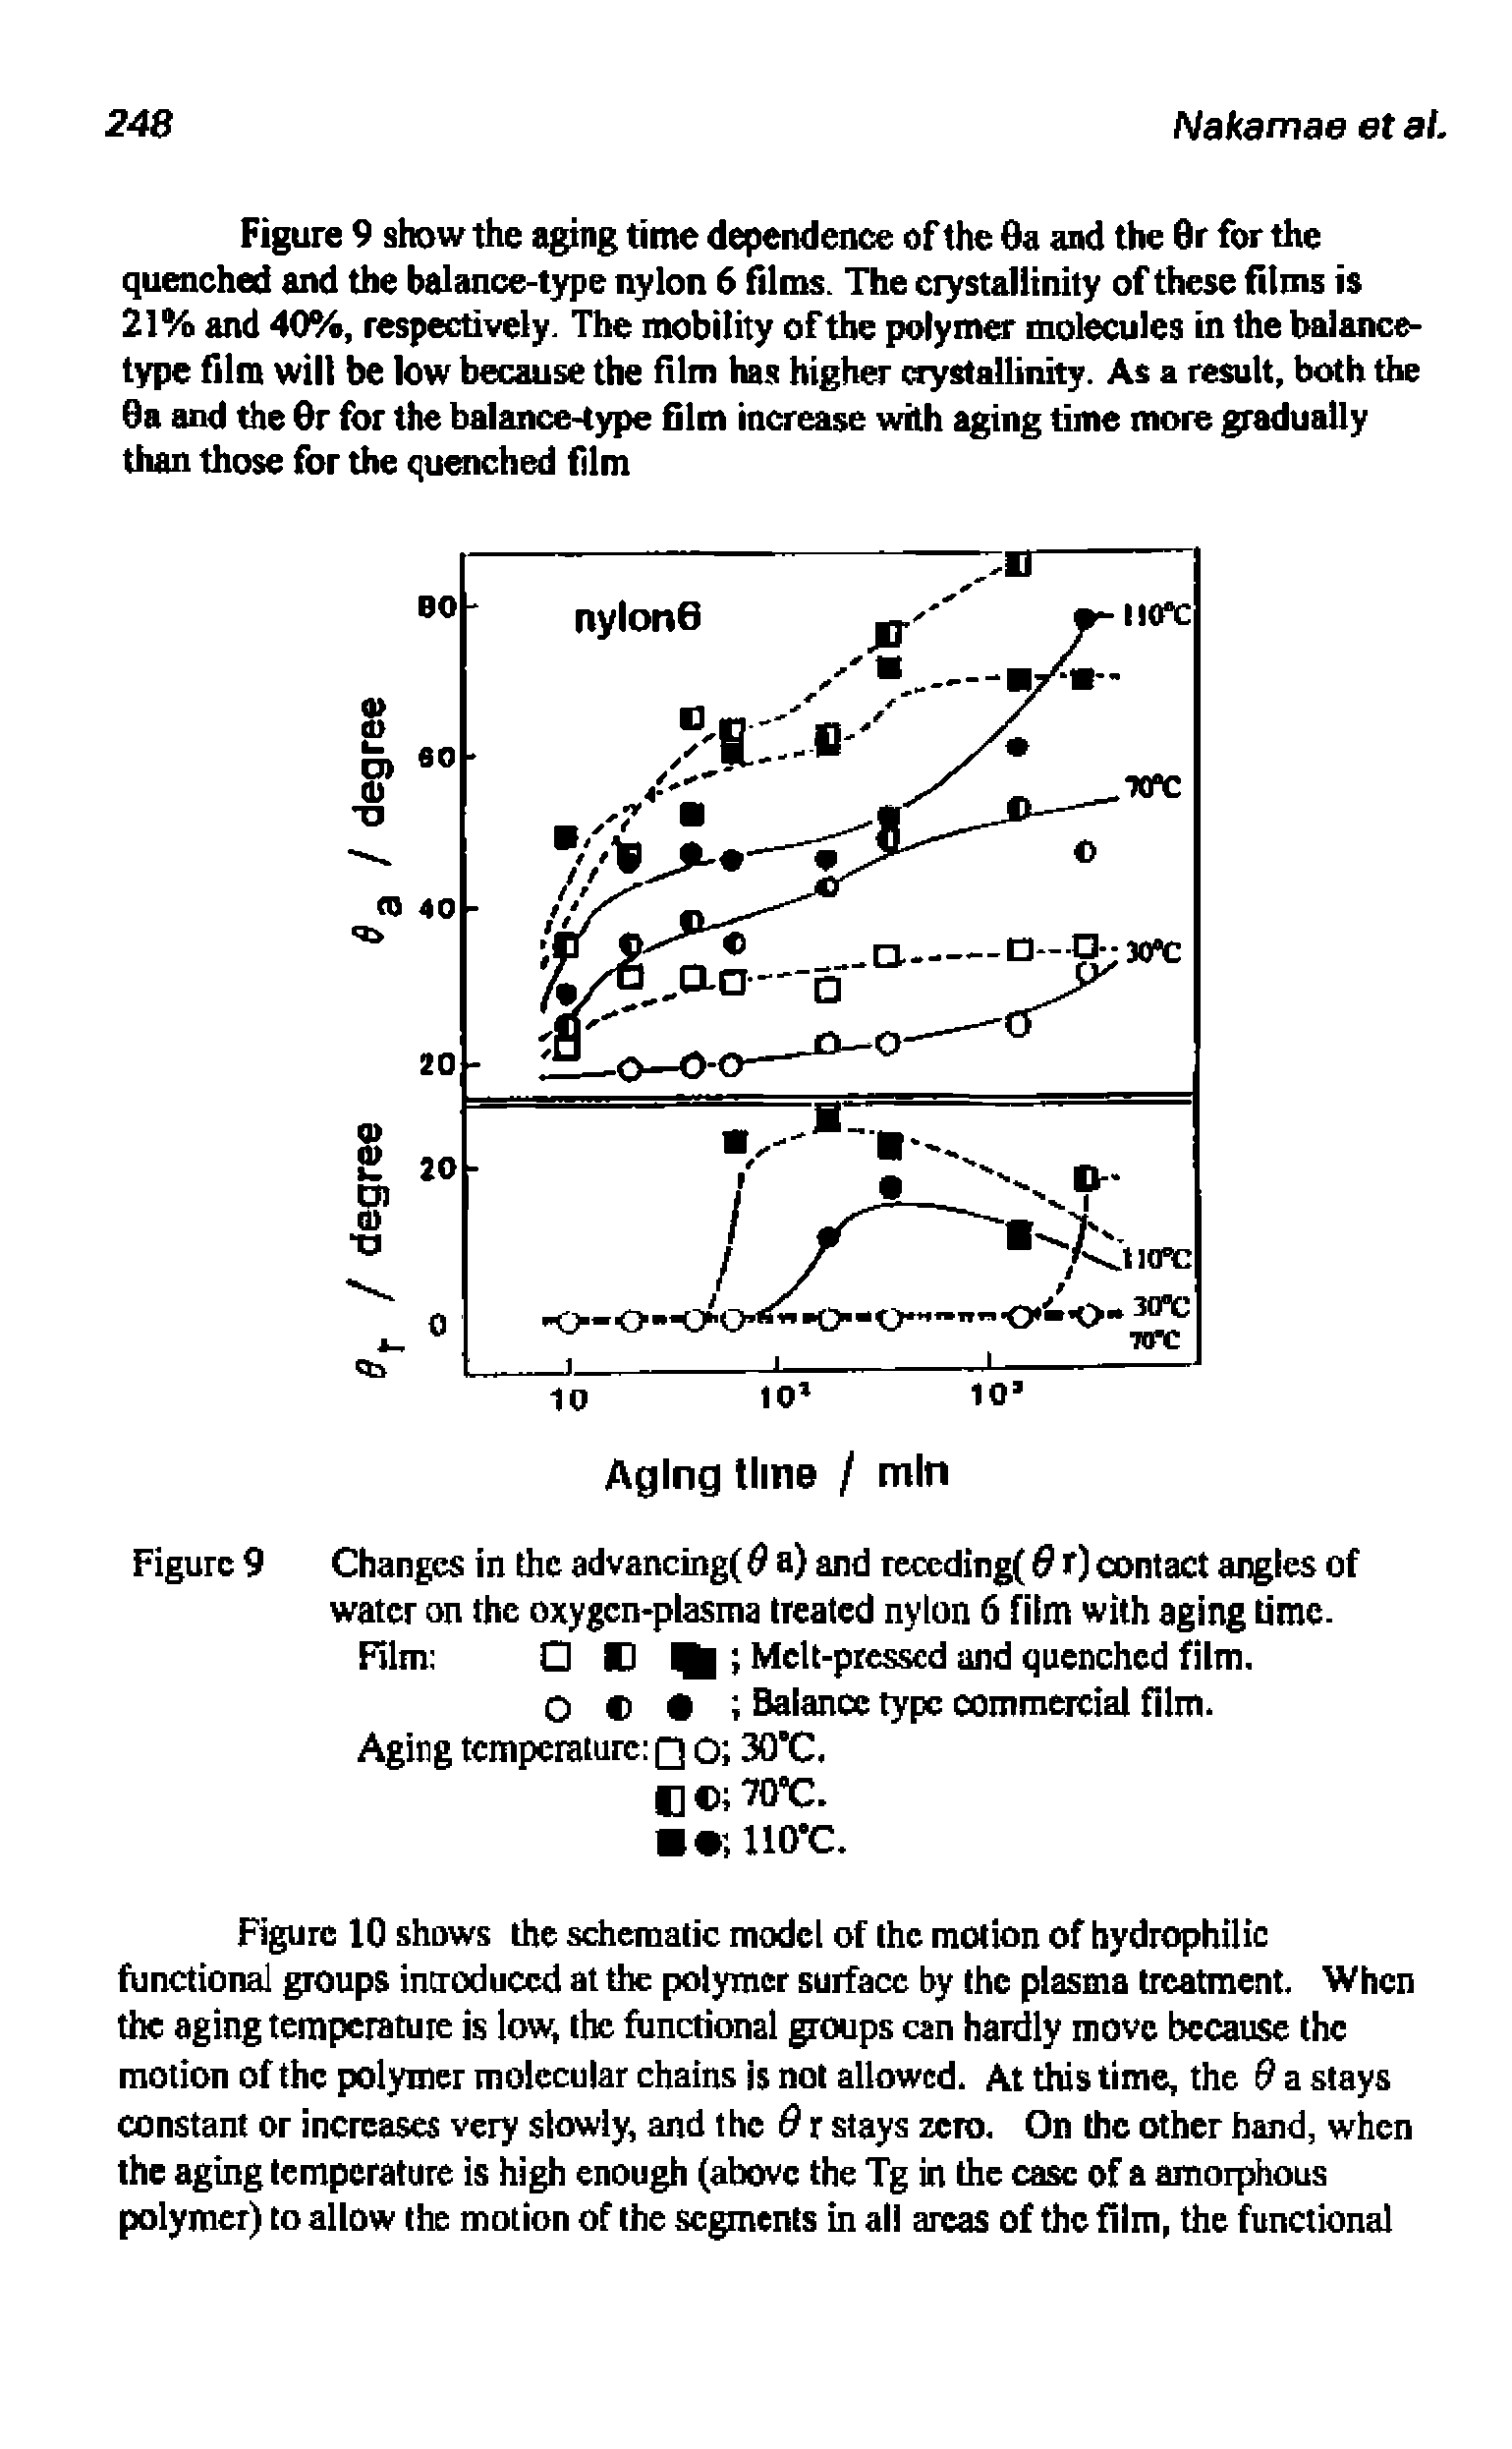 Figure 9 Changes in the advancing( a) and reccding( 6 r) contact angles of water on the oxygen-plasma treated nylon 6 film with aging time. Rim D Mclt-piesscd and quenched film.